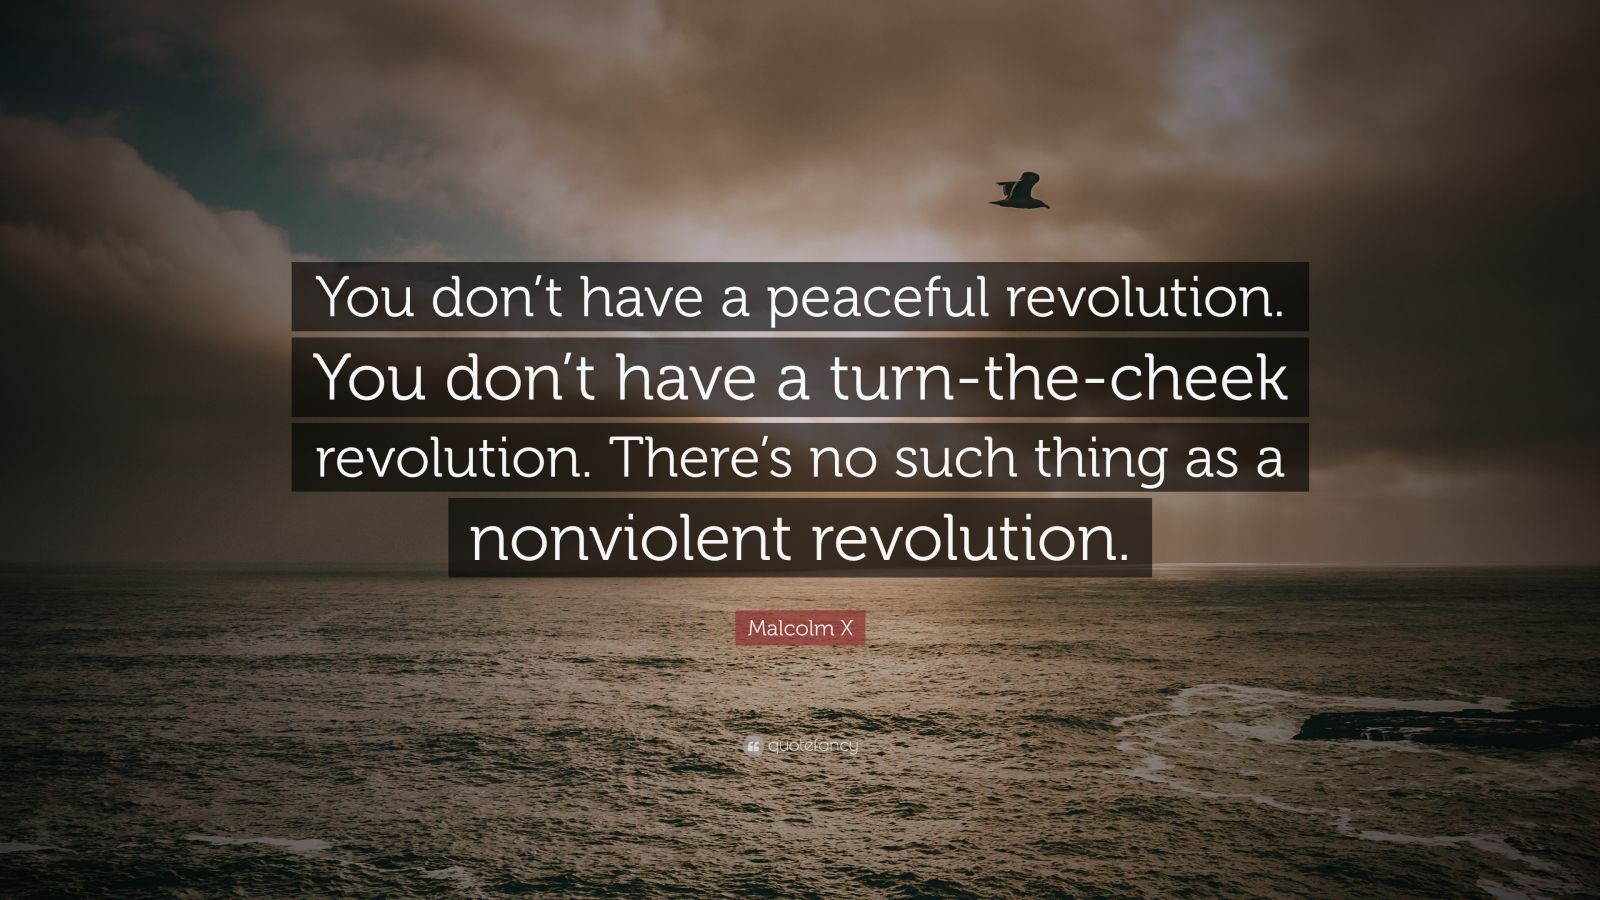 There will be no peaceful revolution